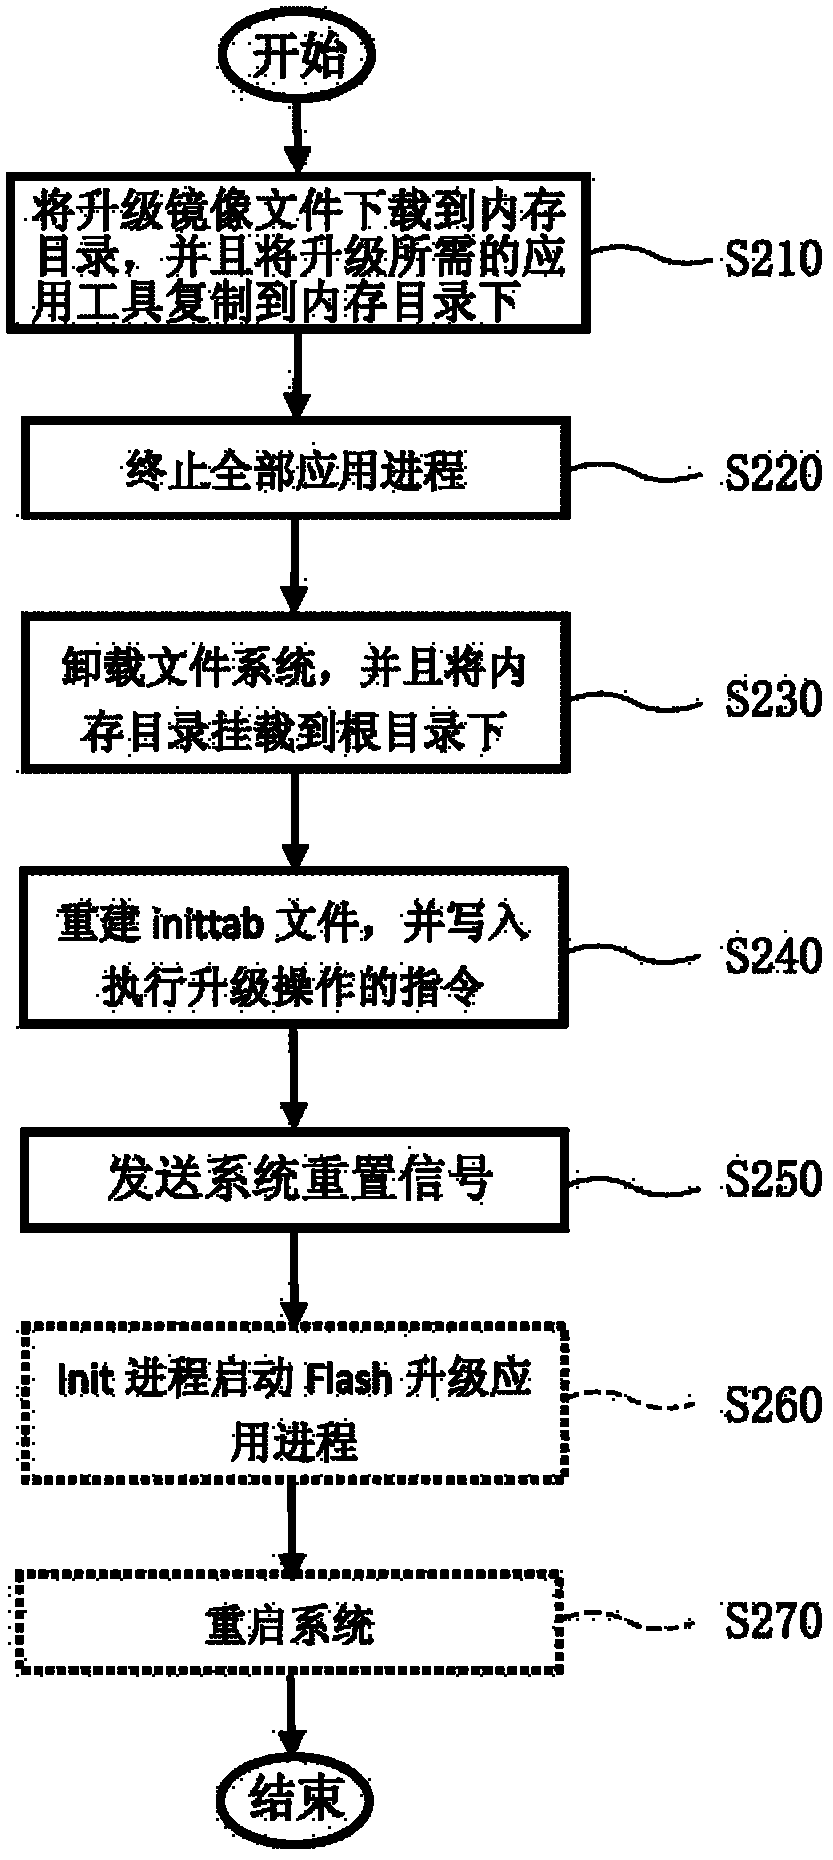 Method for Upgrading Flash File System in Embedded System